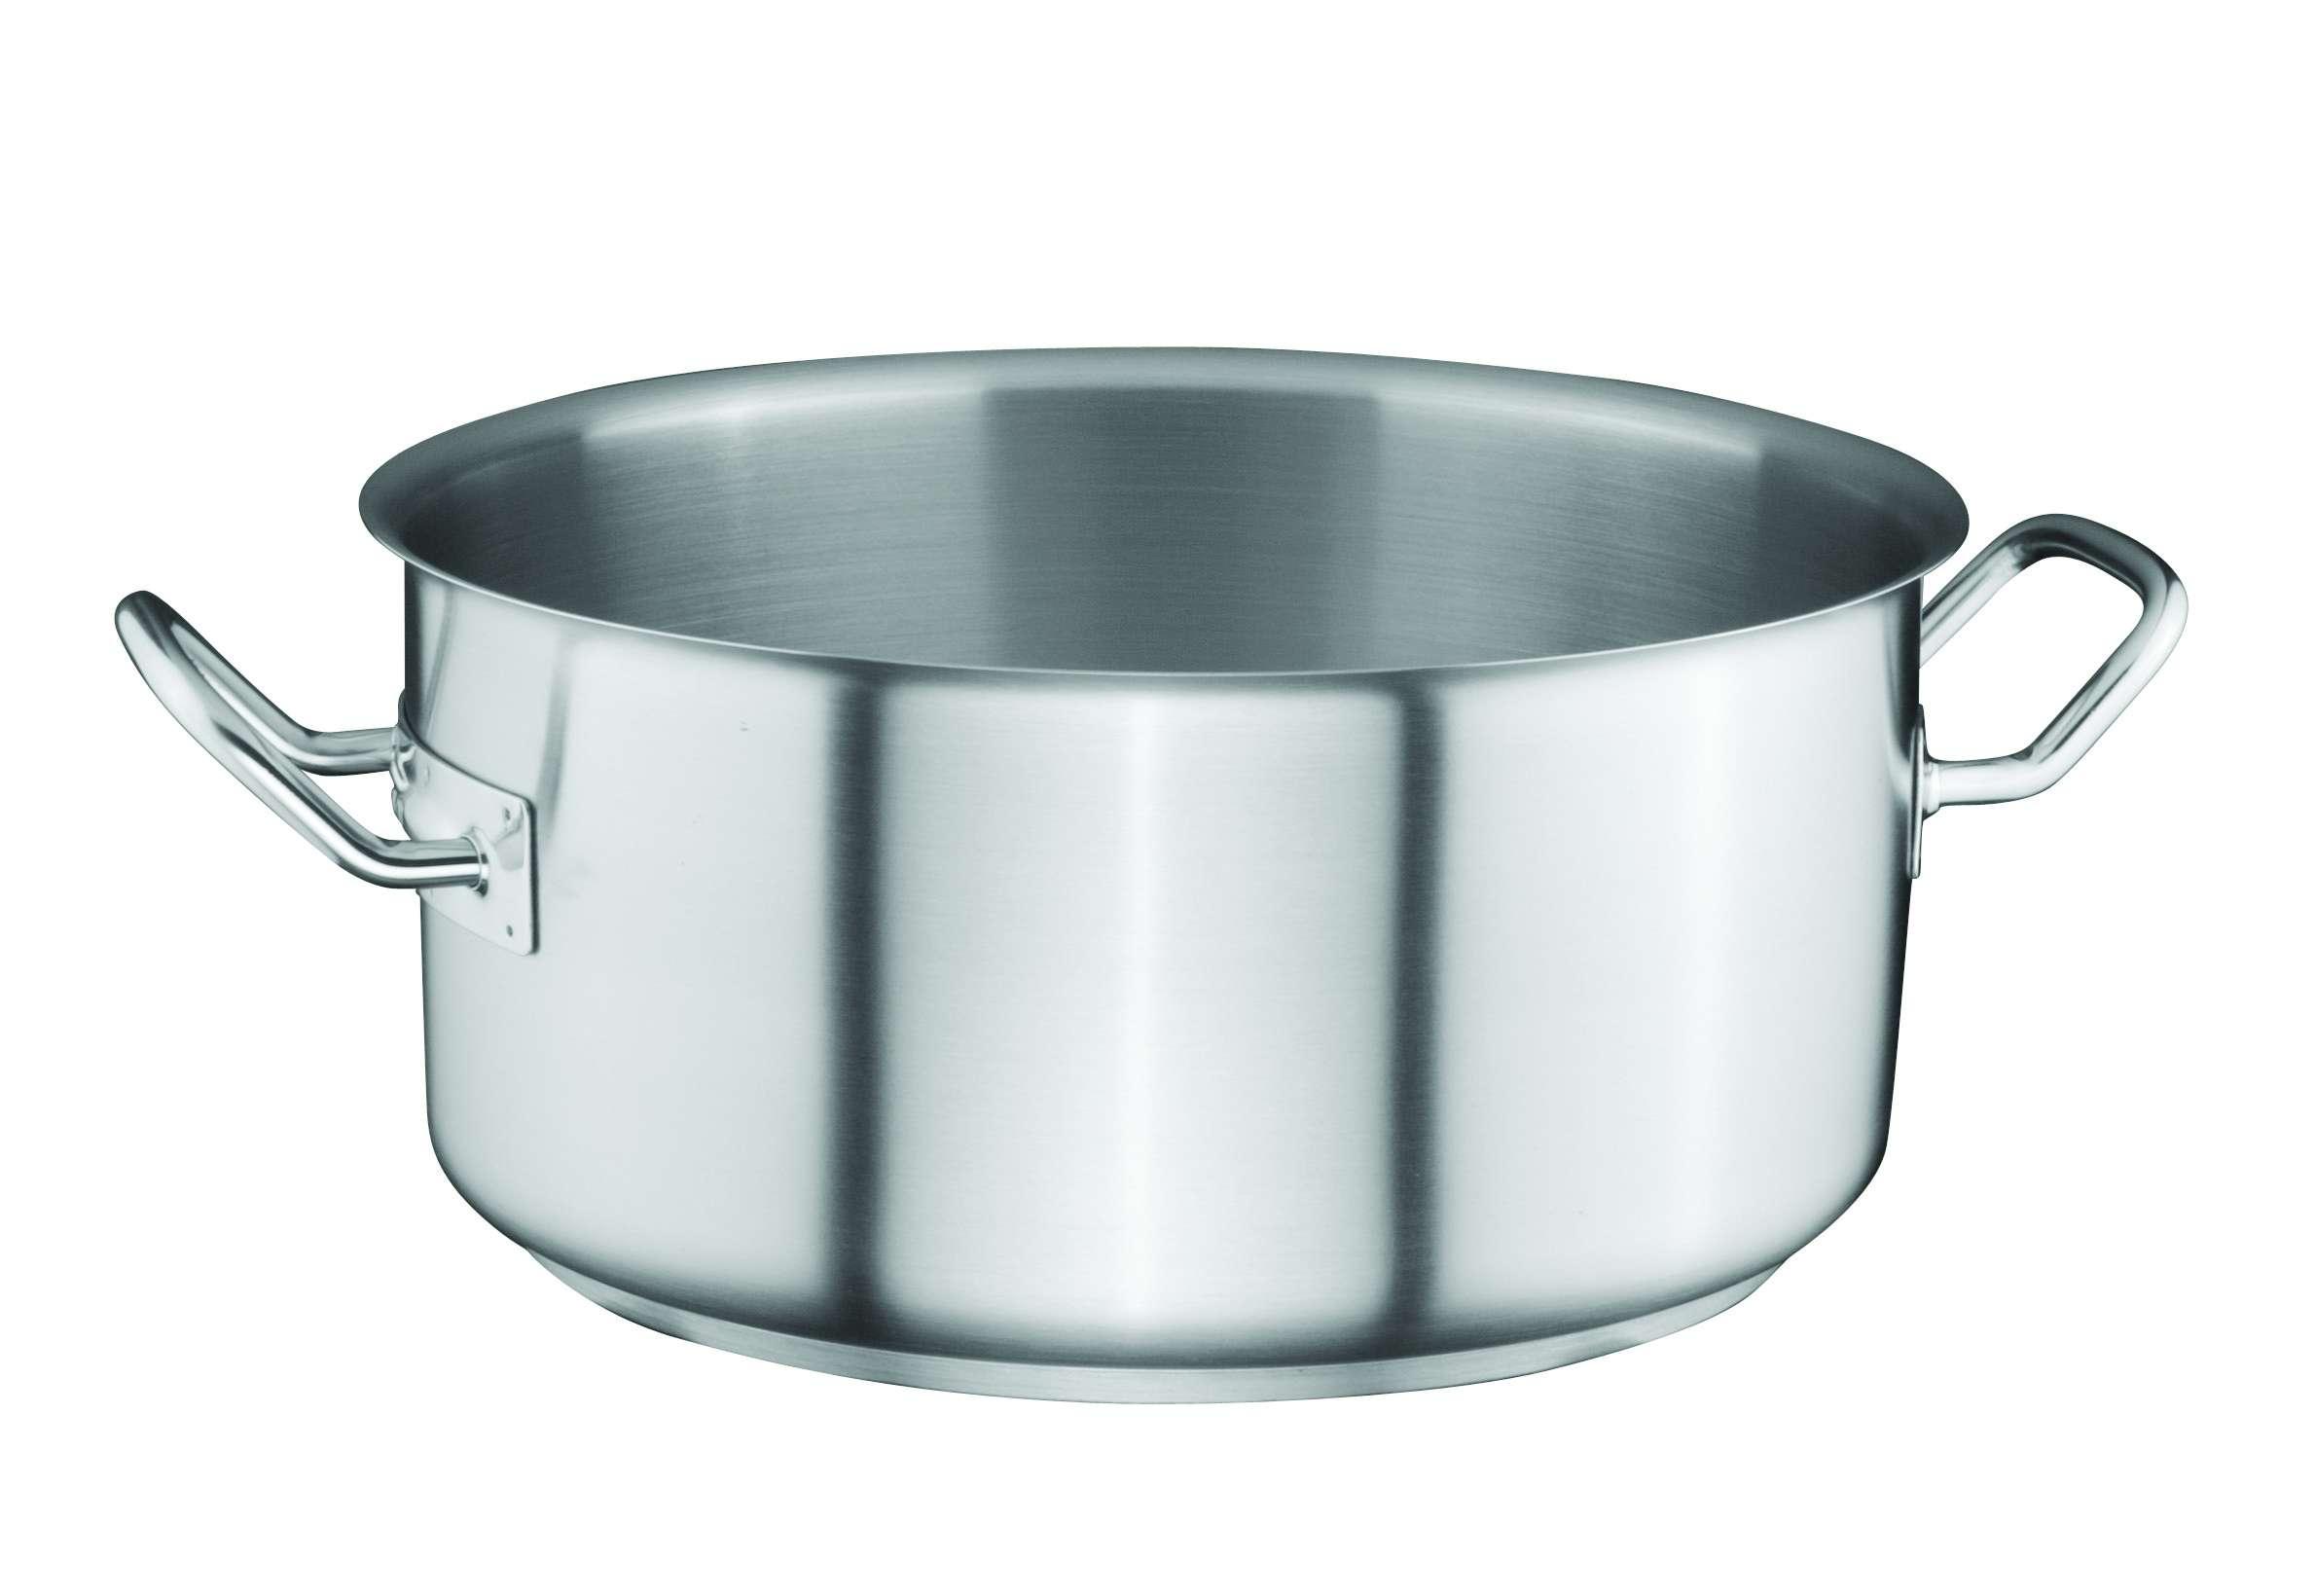 Ozti Stainless Steel Casserole Pot 40 cm x 19 cm Silver Stainless Steel